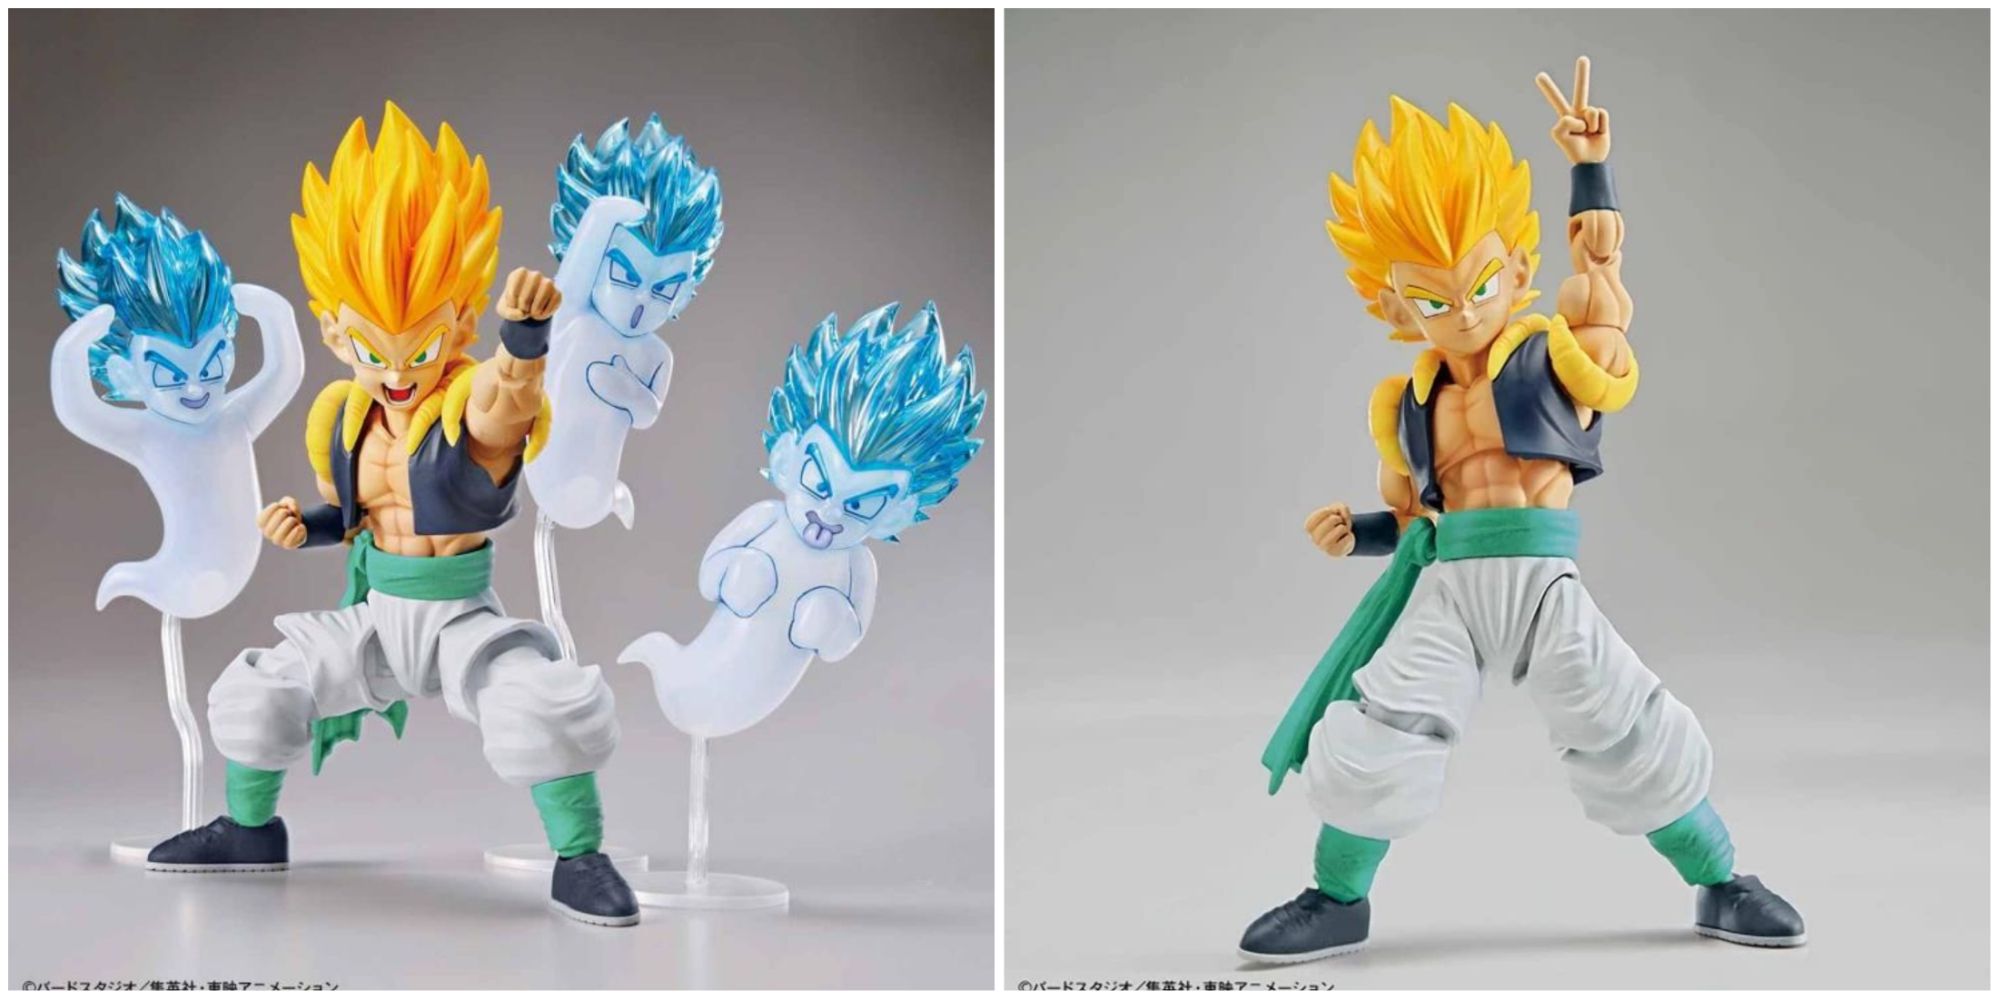 Goku action figure • Compare & find best prices today »